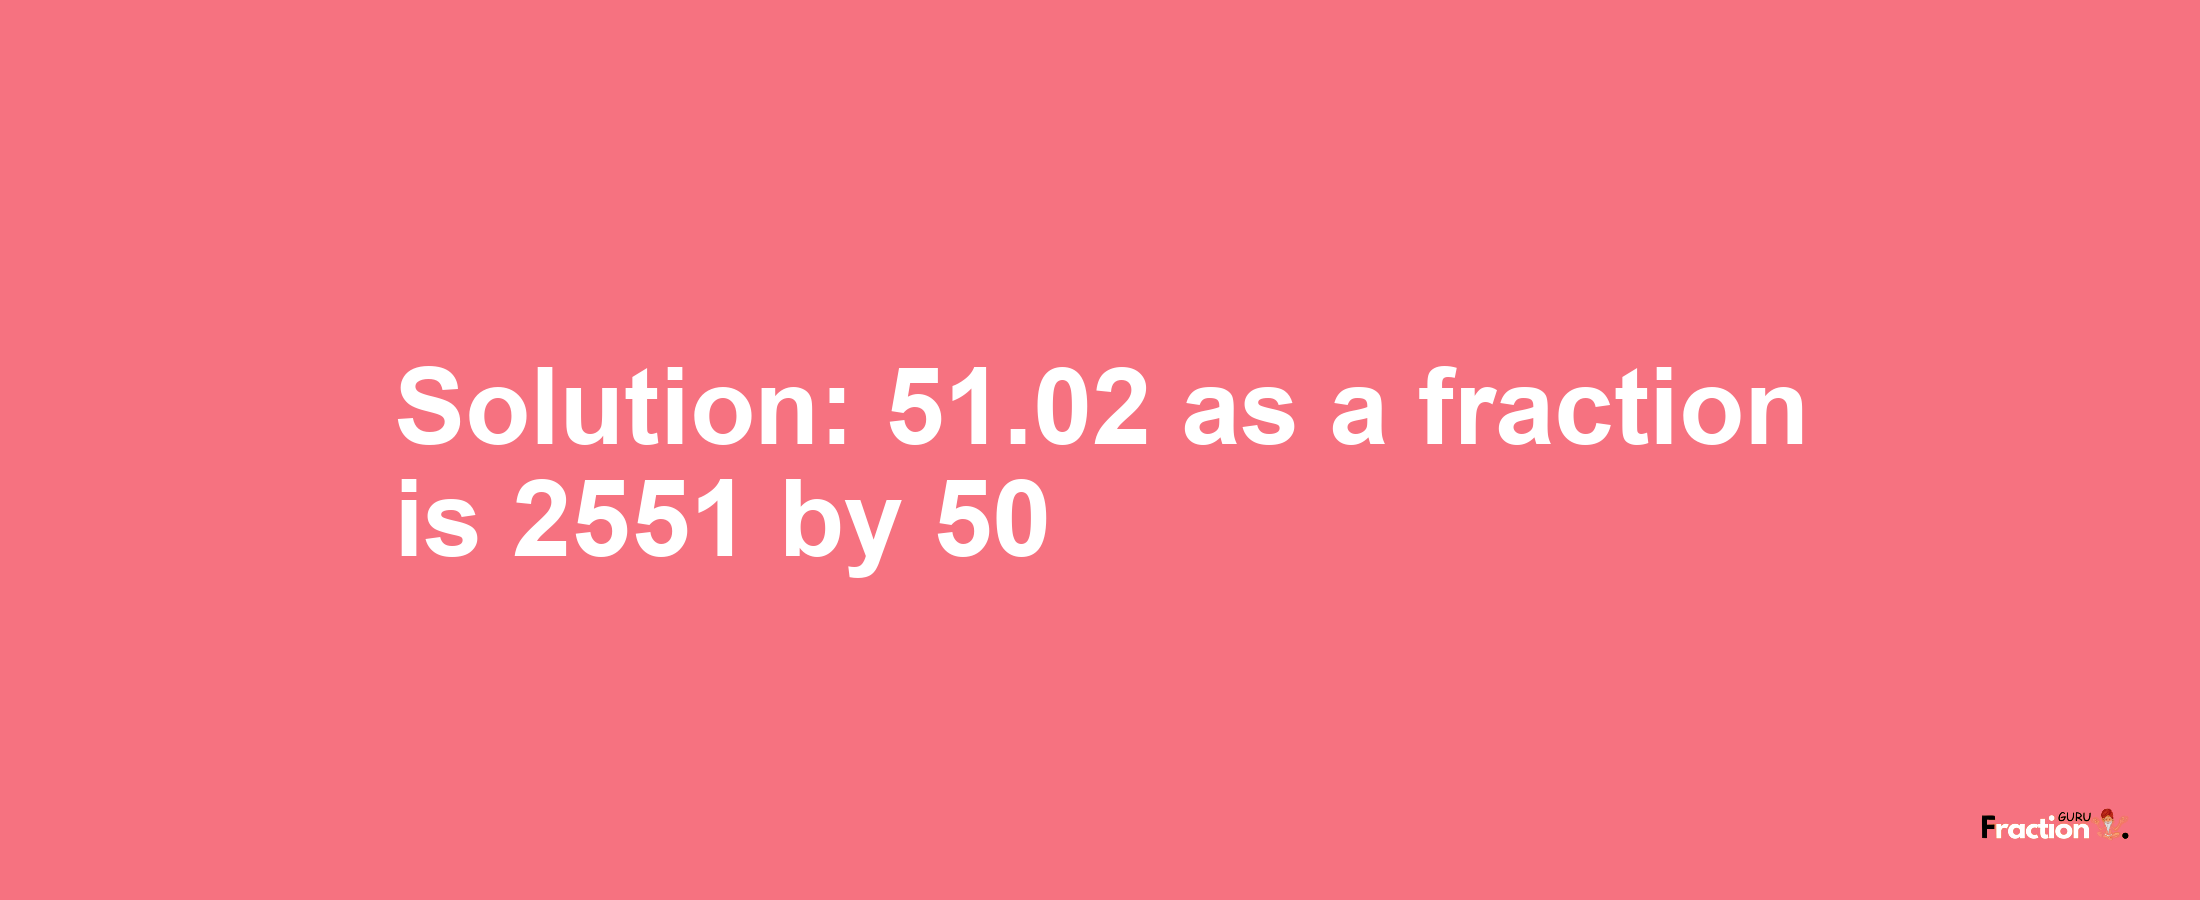 Solution:51.02 as a fraction is 2551/50